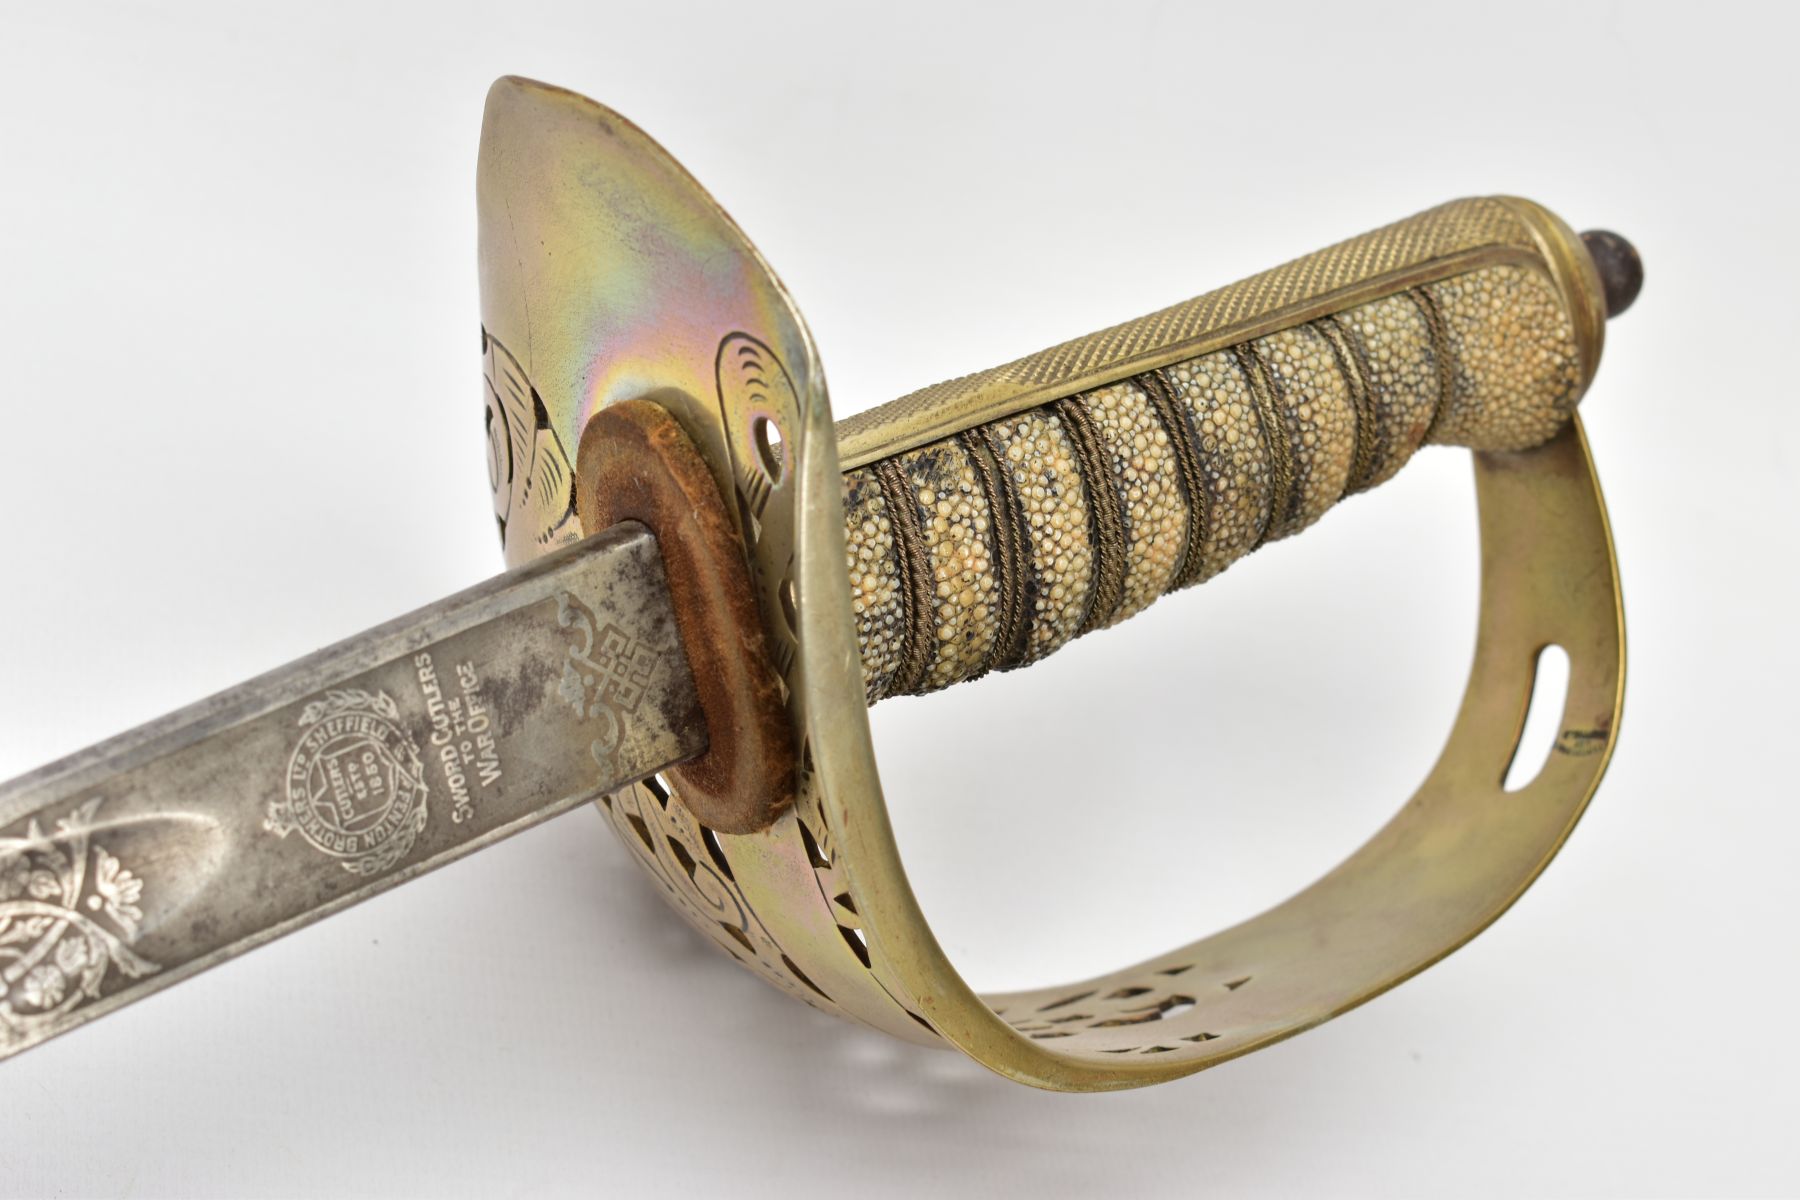 A FENTON BROTHERS LTD, SHEFFIELD 1897 PATTERN INFANTRY OFFICERS SWORD AND SCABBARD, the blade is - Image 14 of 15